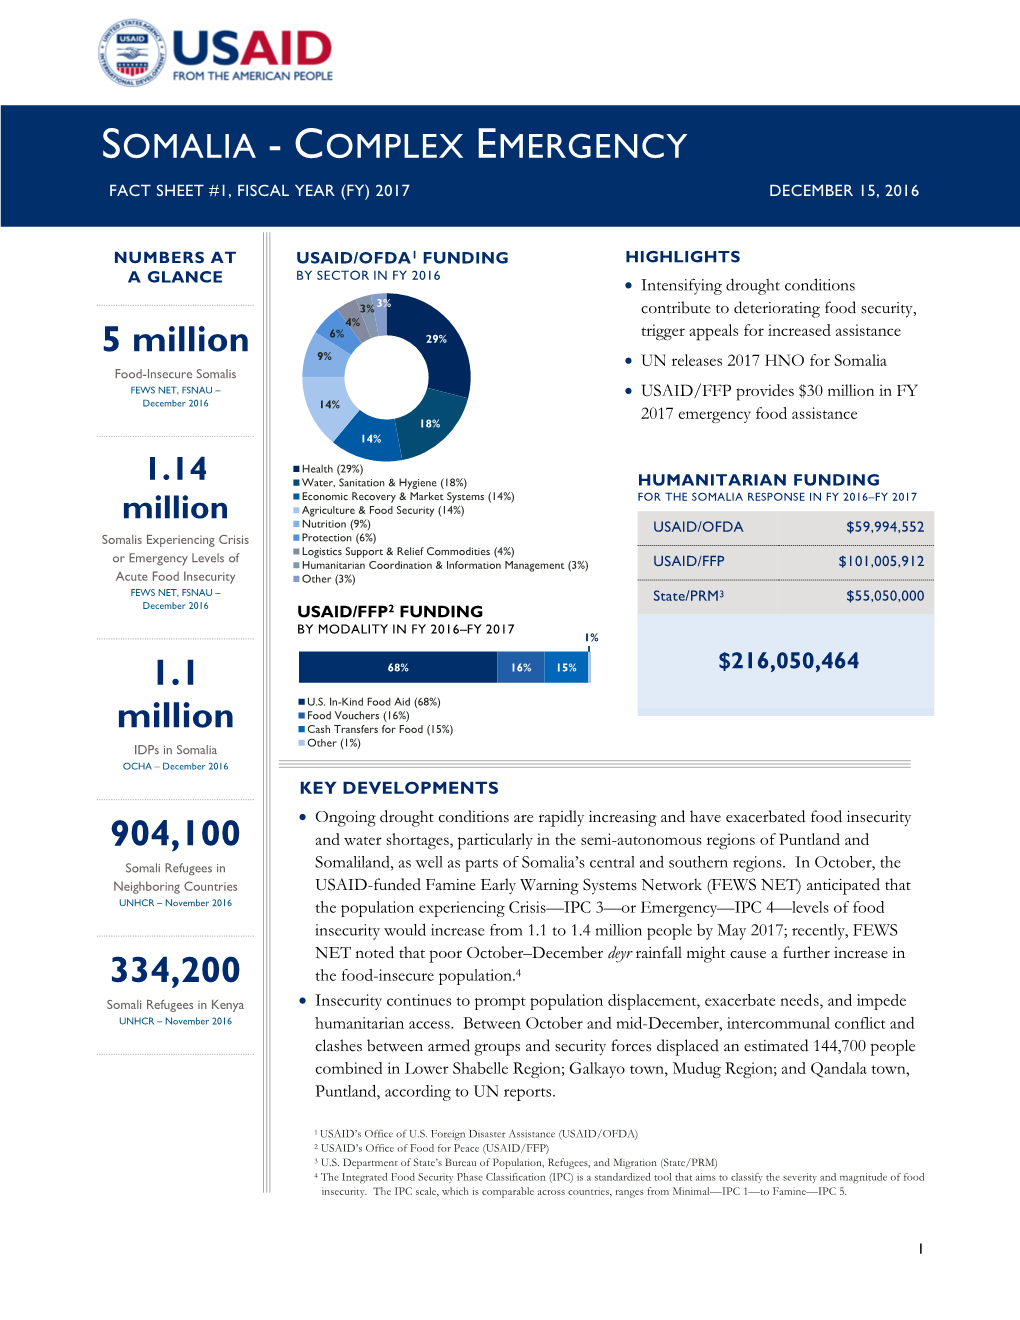 Somalia - Complex Emergency Fact Sheet #1, Fiscal Year (Fy) 2017 December 15, 2016